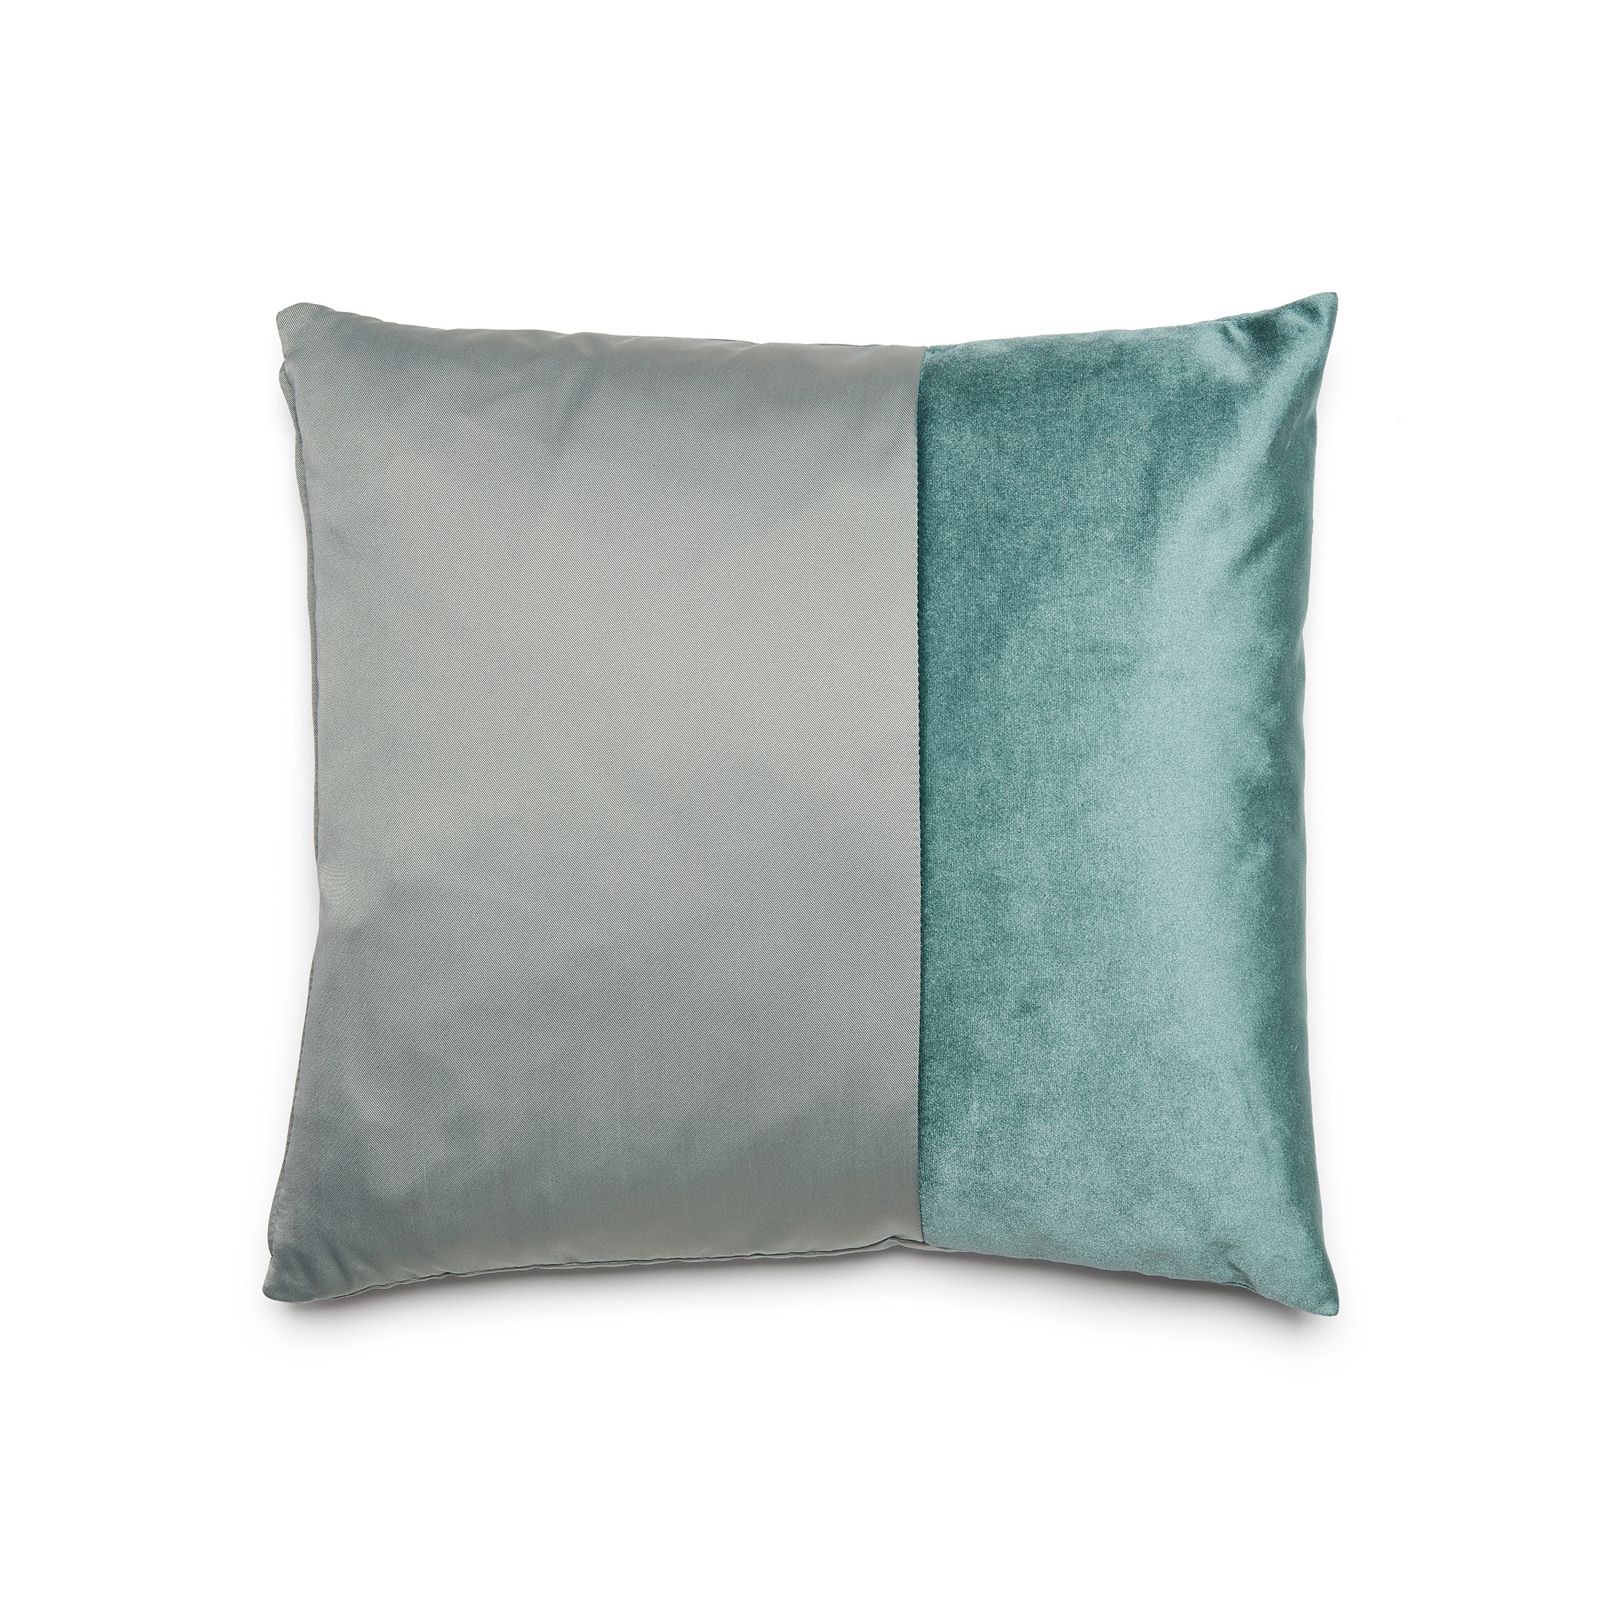 https://www.turbulences-deco.fr/wp-content/uploads/2017/10/puikdesign_coussin-Duo.jpg